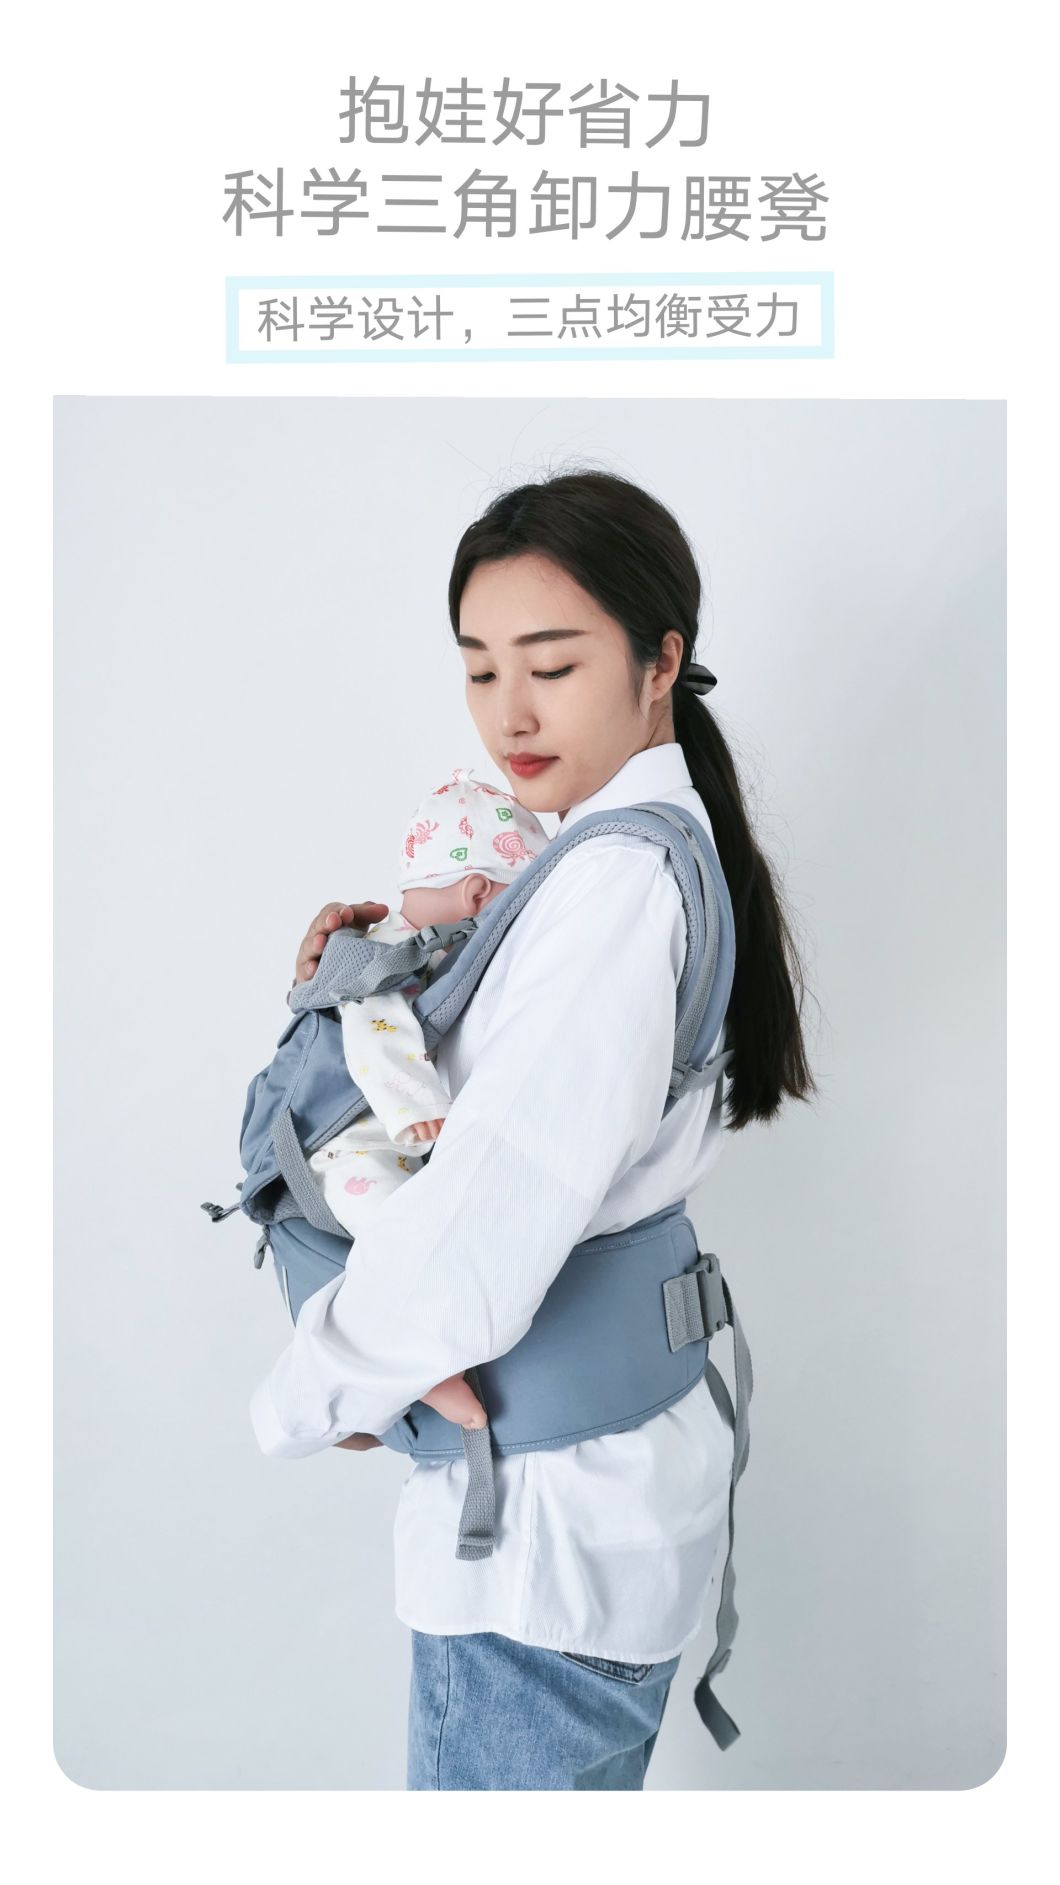 The New 2021 Xgt Stretchy Breathable Baby Holder Carrier for Newborn Infant Kid Newborn Baby Carrier